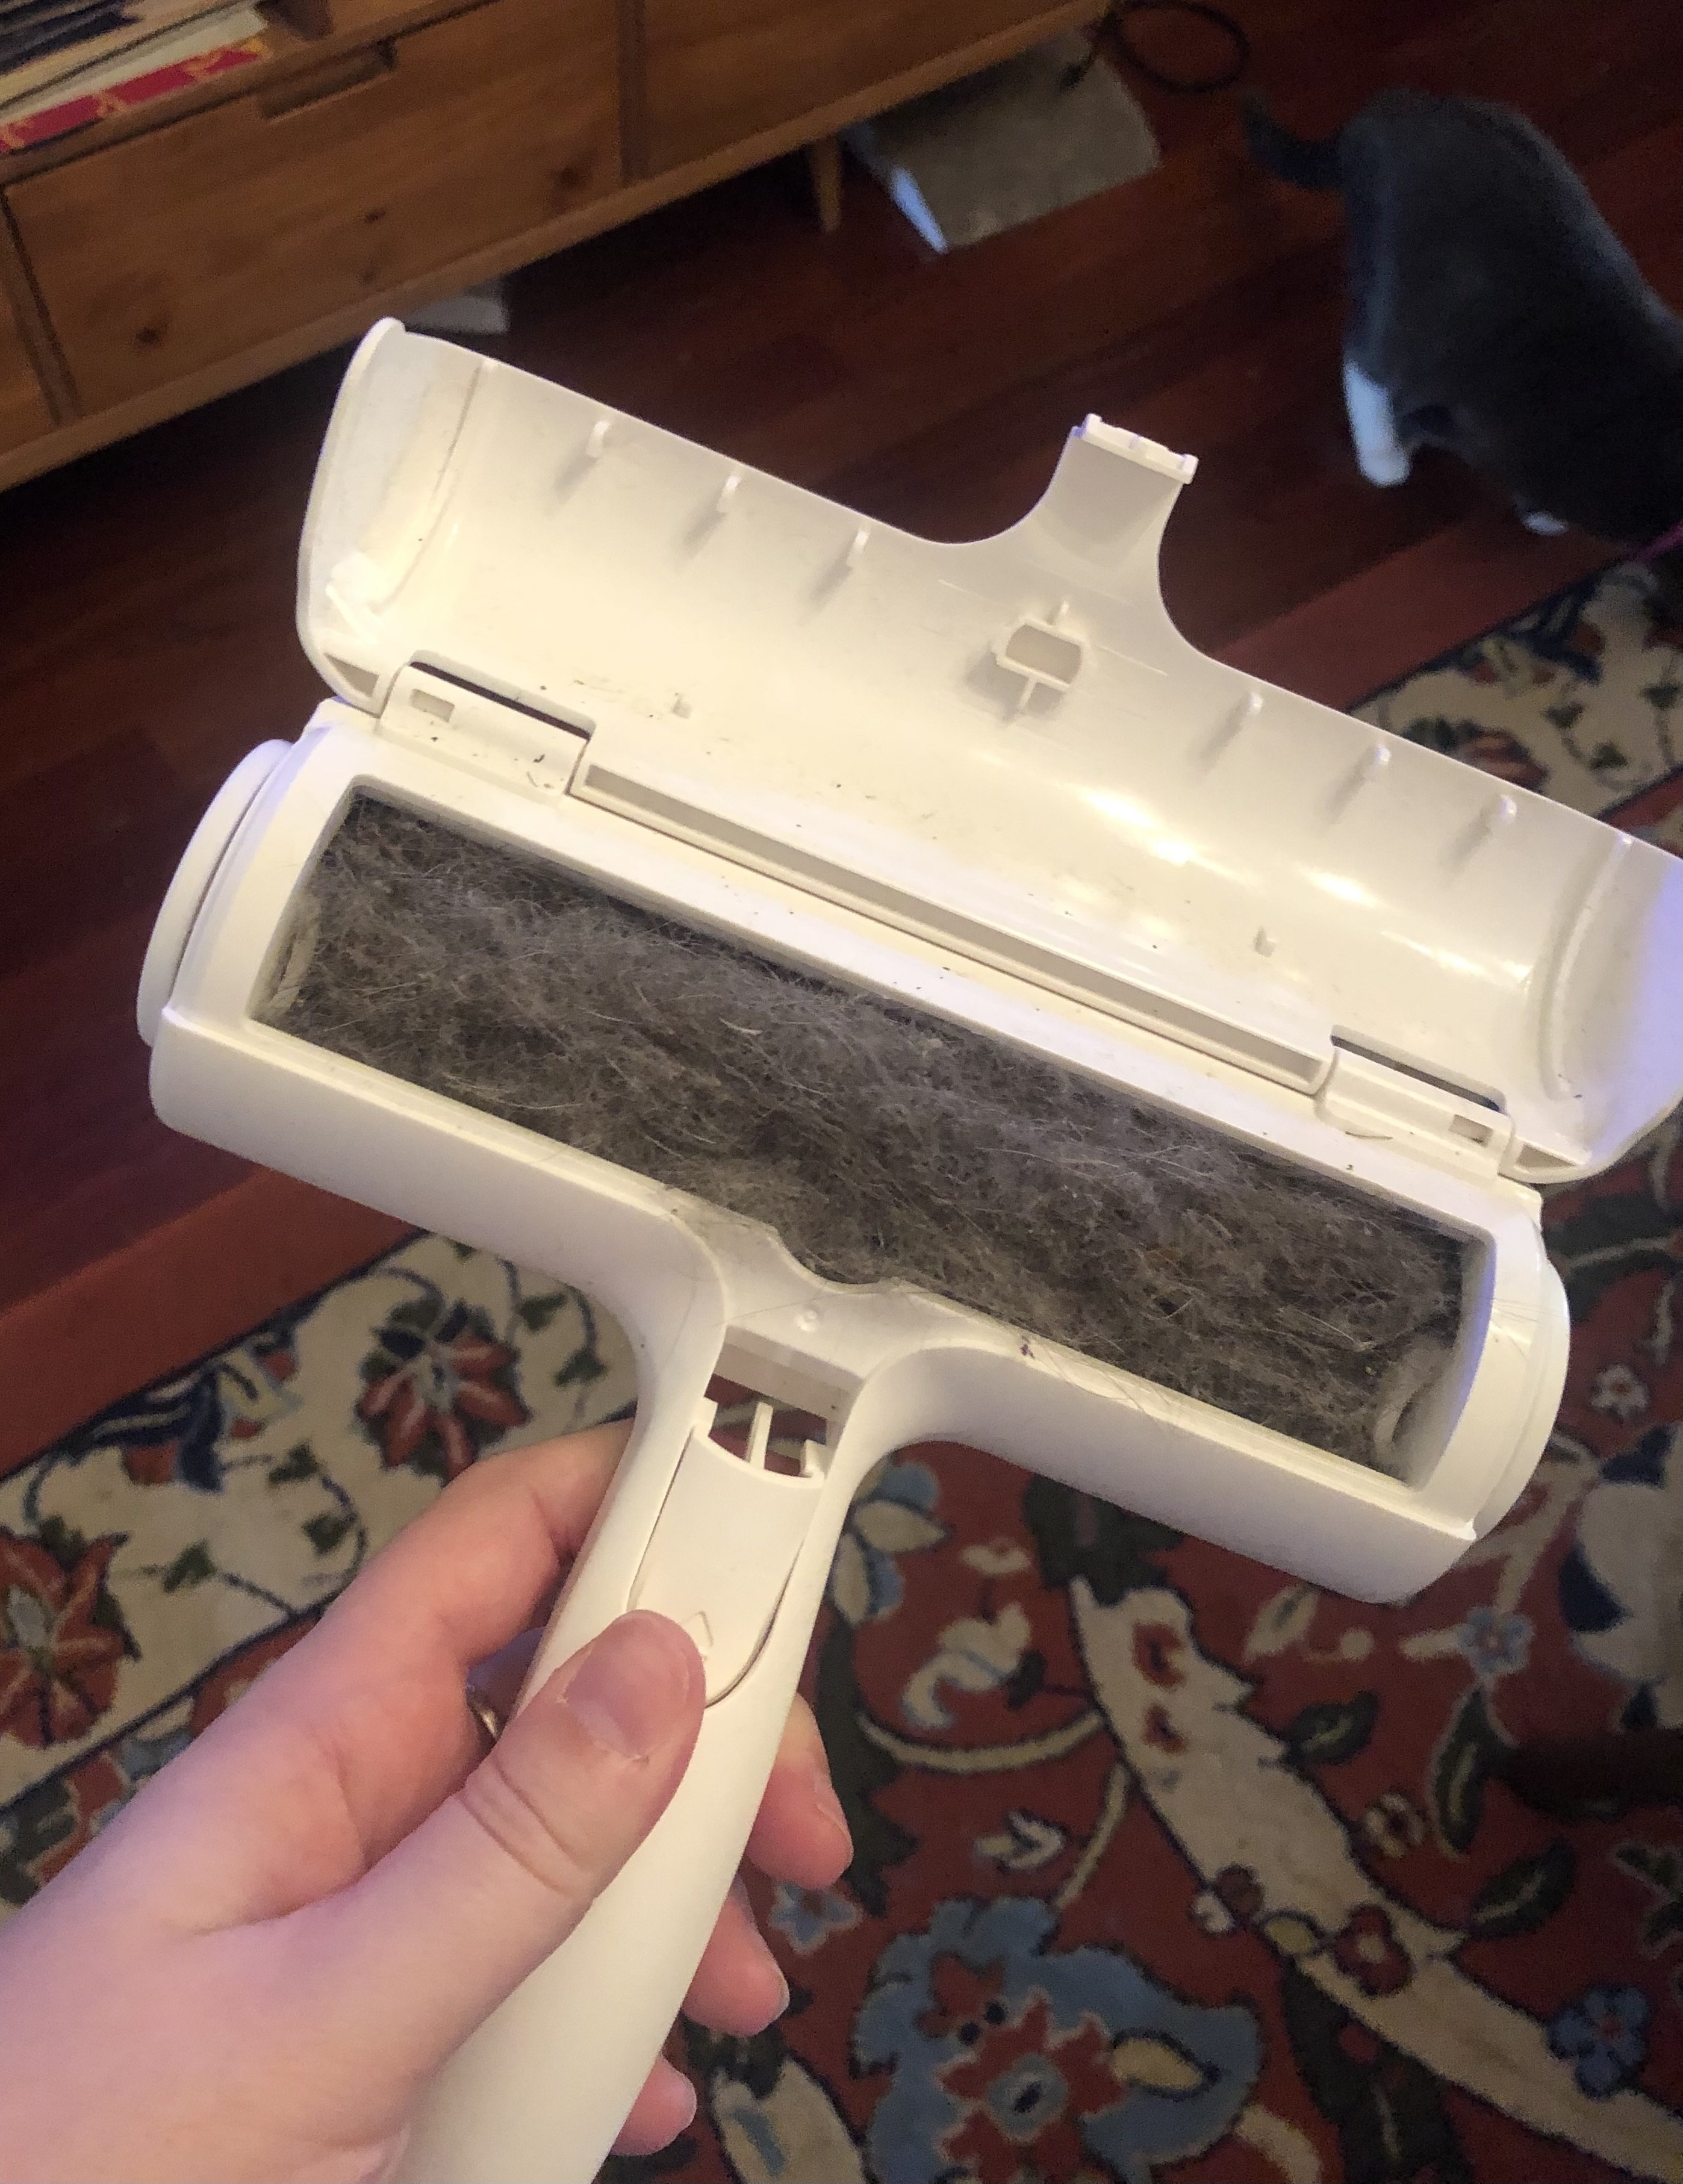 A BuzzFeed editor&#x27;s photo of her Chom Chom roller full of cat hair